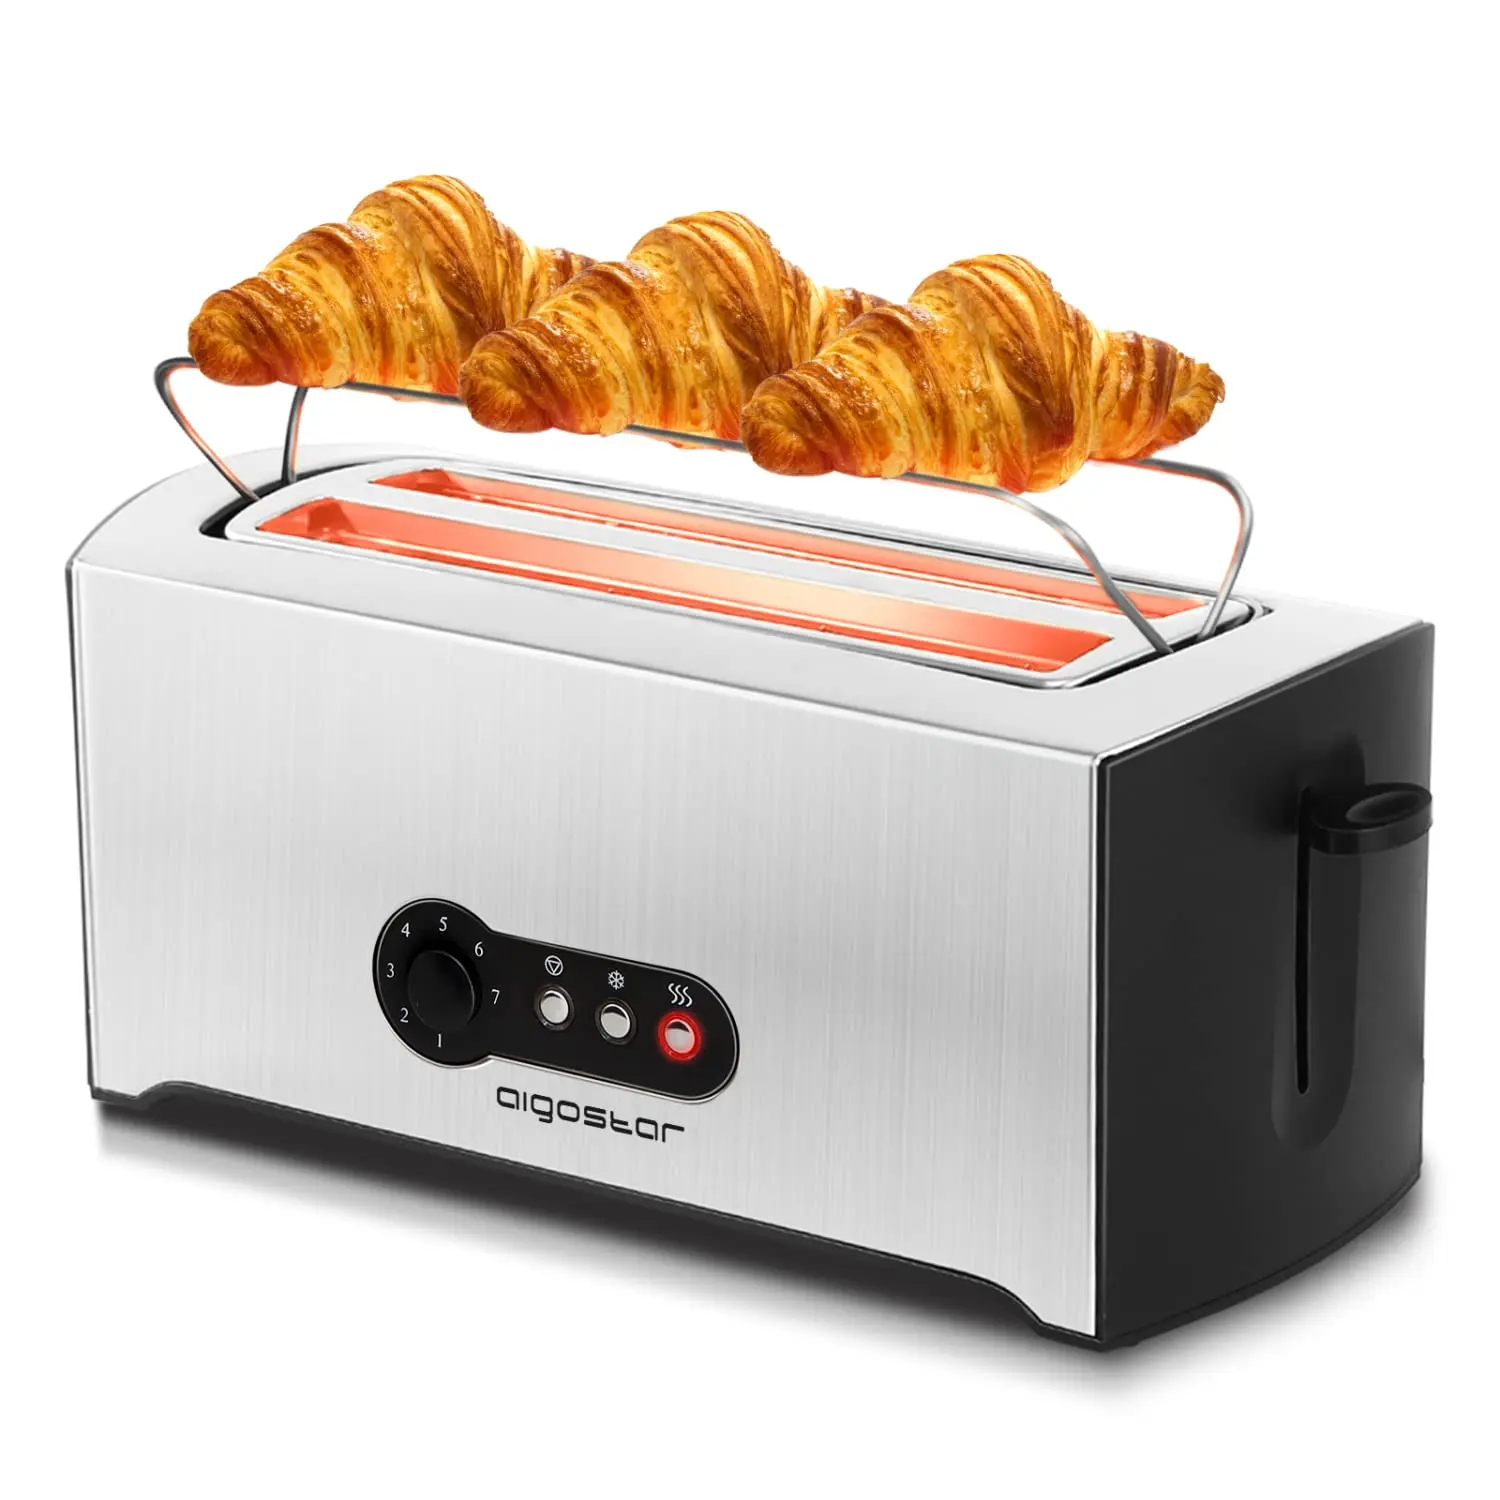 https://ae01.alicdn.com/kf/S898abf2be42542859fc24bfe76530c51L/Aigostar-Toaster-2-Slot-Long-and-Wide-Toaster-with-7-Levels-of-Roasting-1600-W-Integrated.jpg